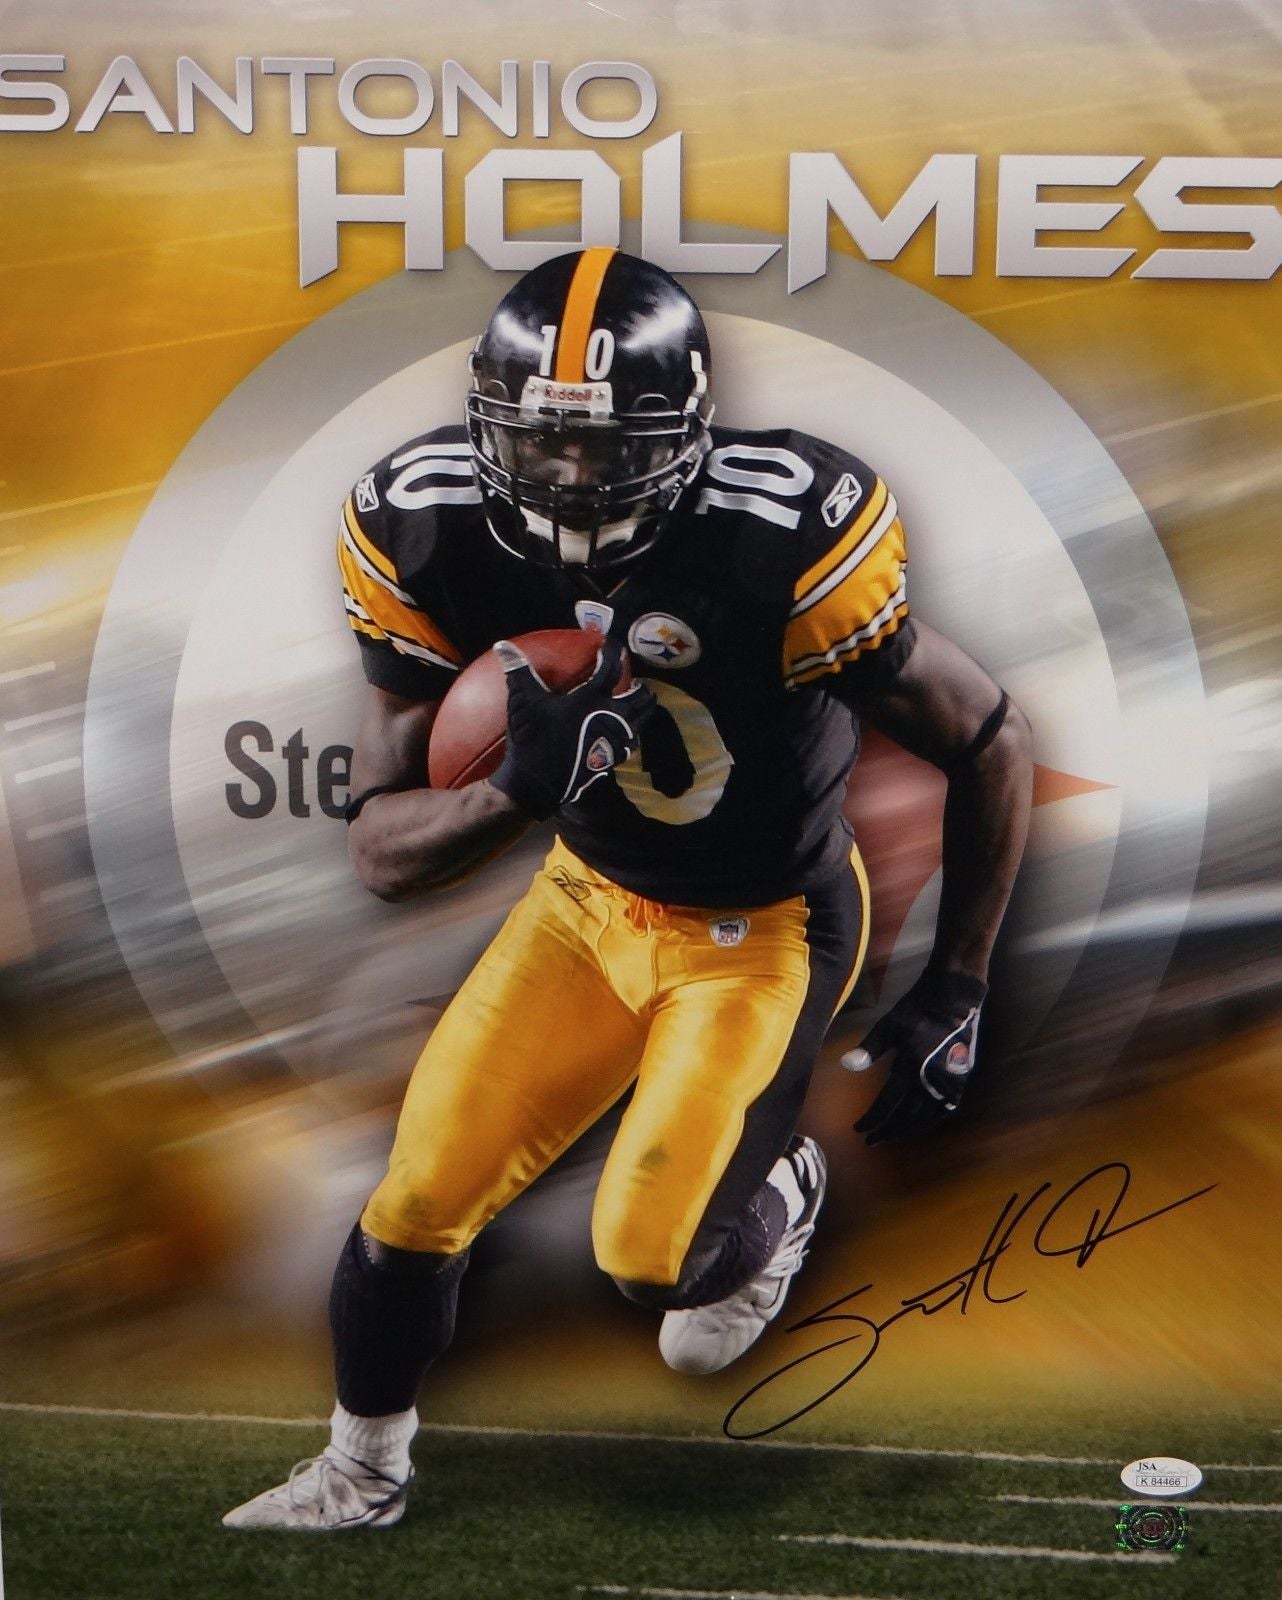 Santonio Holmes Autographed Steelers 16x20 Vertical Running Photo- JSA –  The Jersey Source